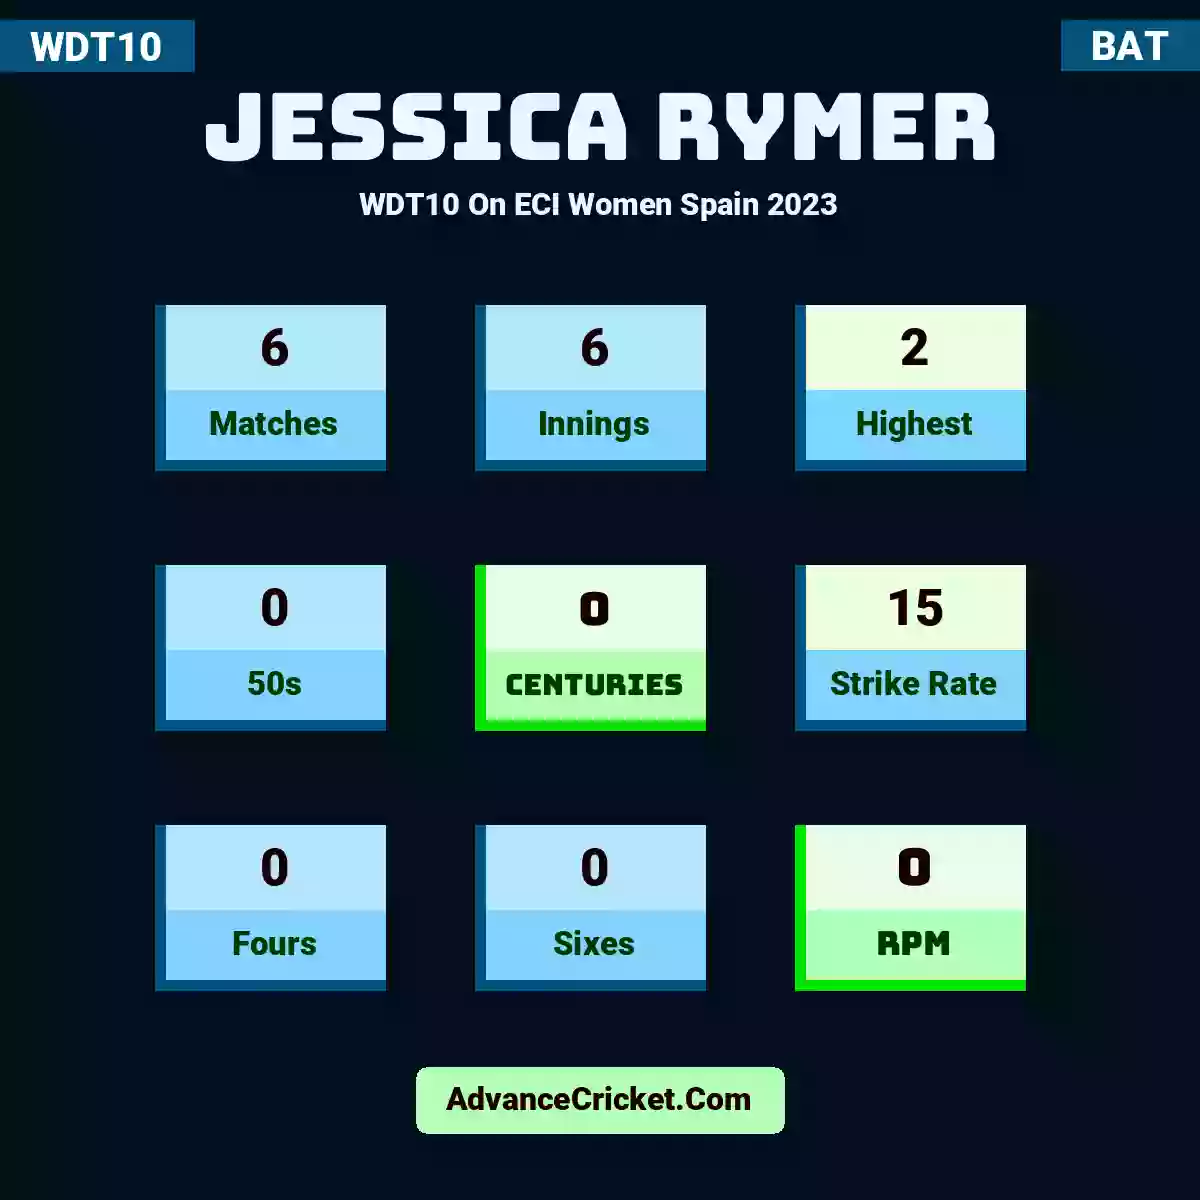 Jessica Rymer WDT10  On ECI Women Spain 2023, Jessica Rymer played 6 matches, scored 2 runs as highest, 0 half-centuries, and 0 centuries, with a strike rate of 15. J.Rymer hit 0 fours and 0 sixes, with an RPM of 0.